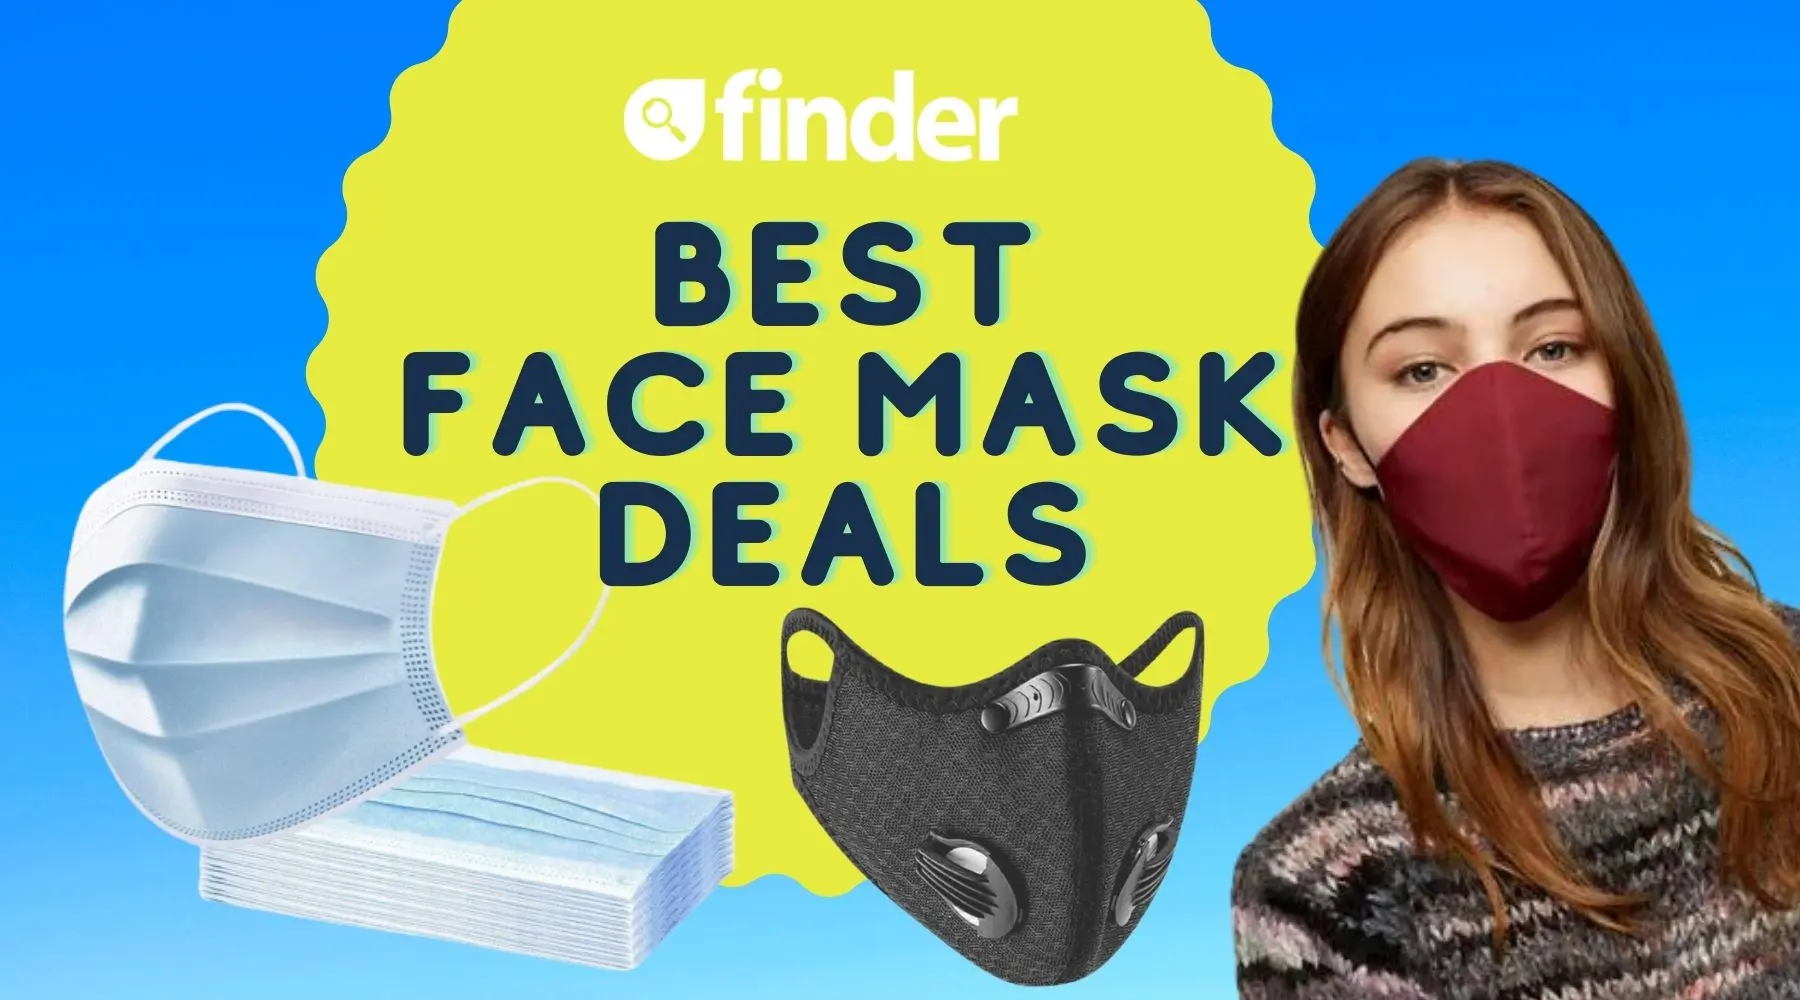 Best face masks deals COVID_Supplied_1800x1000